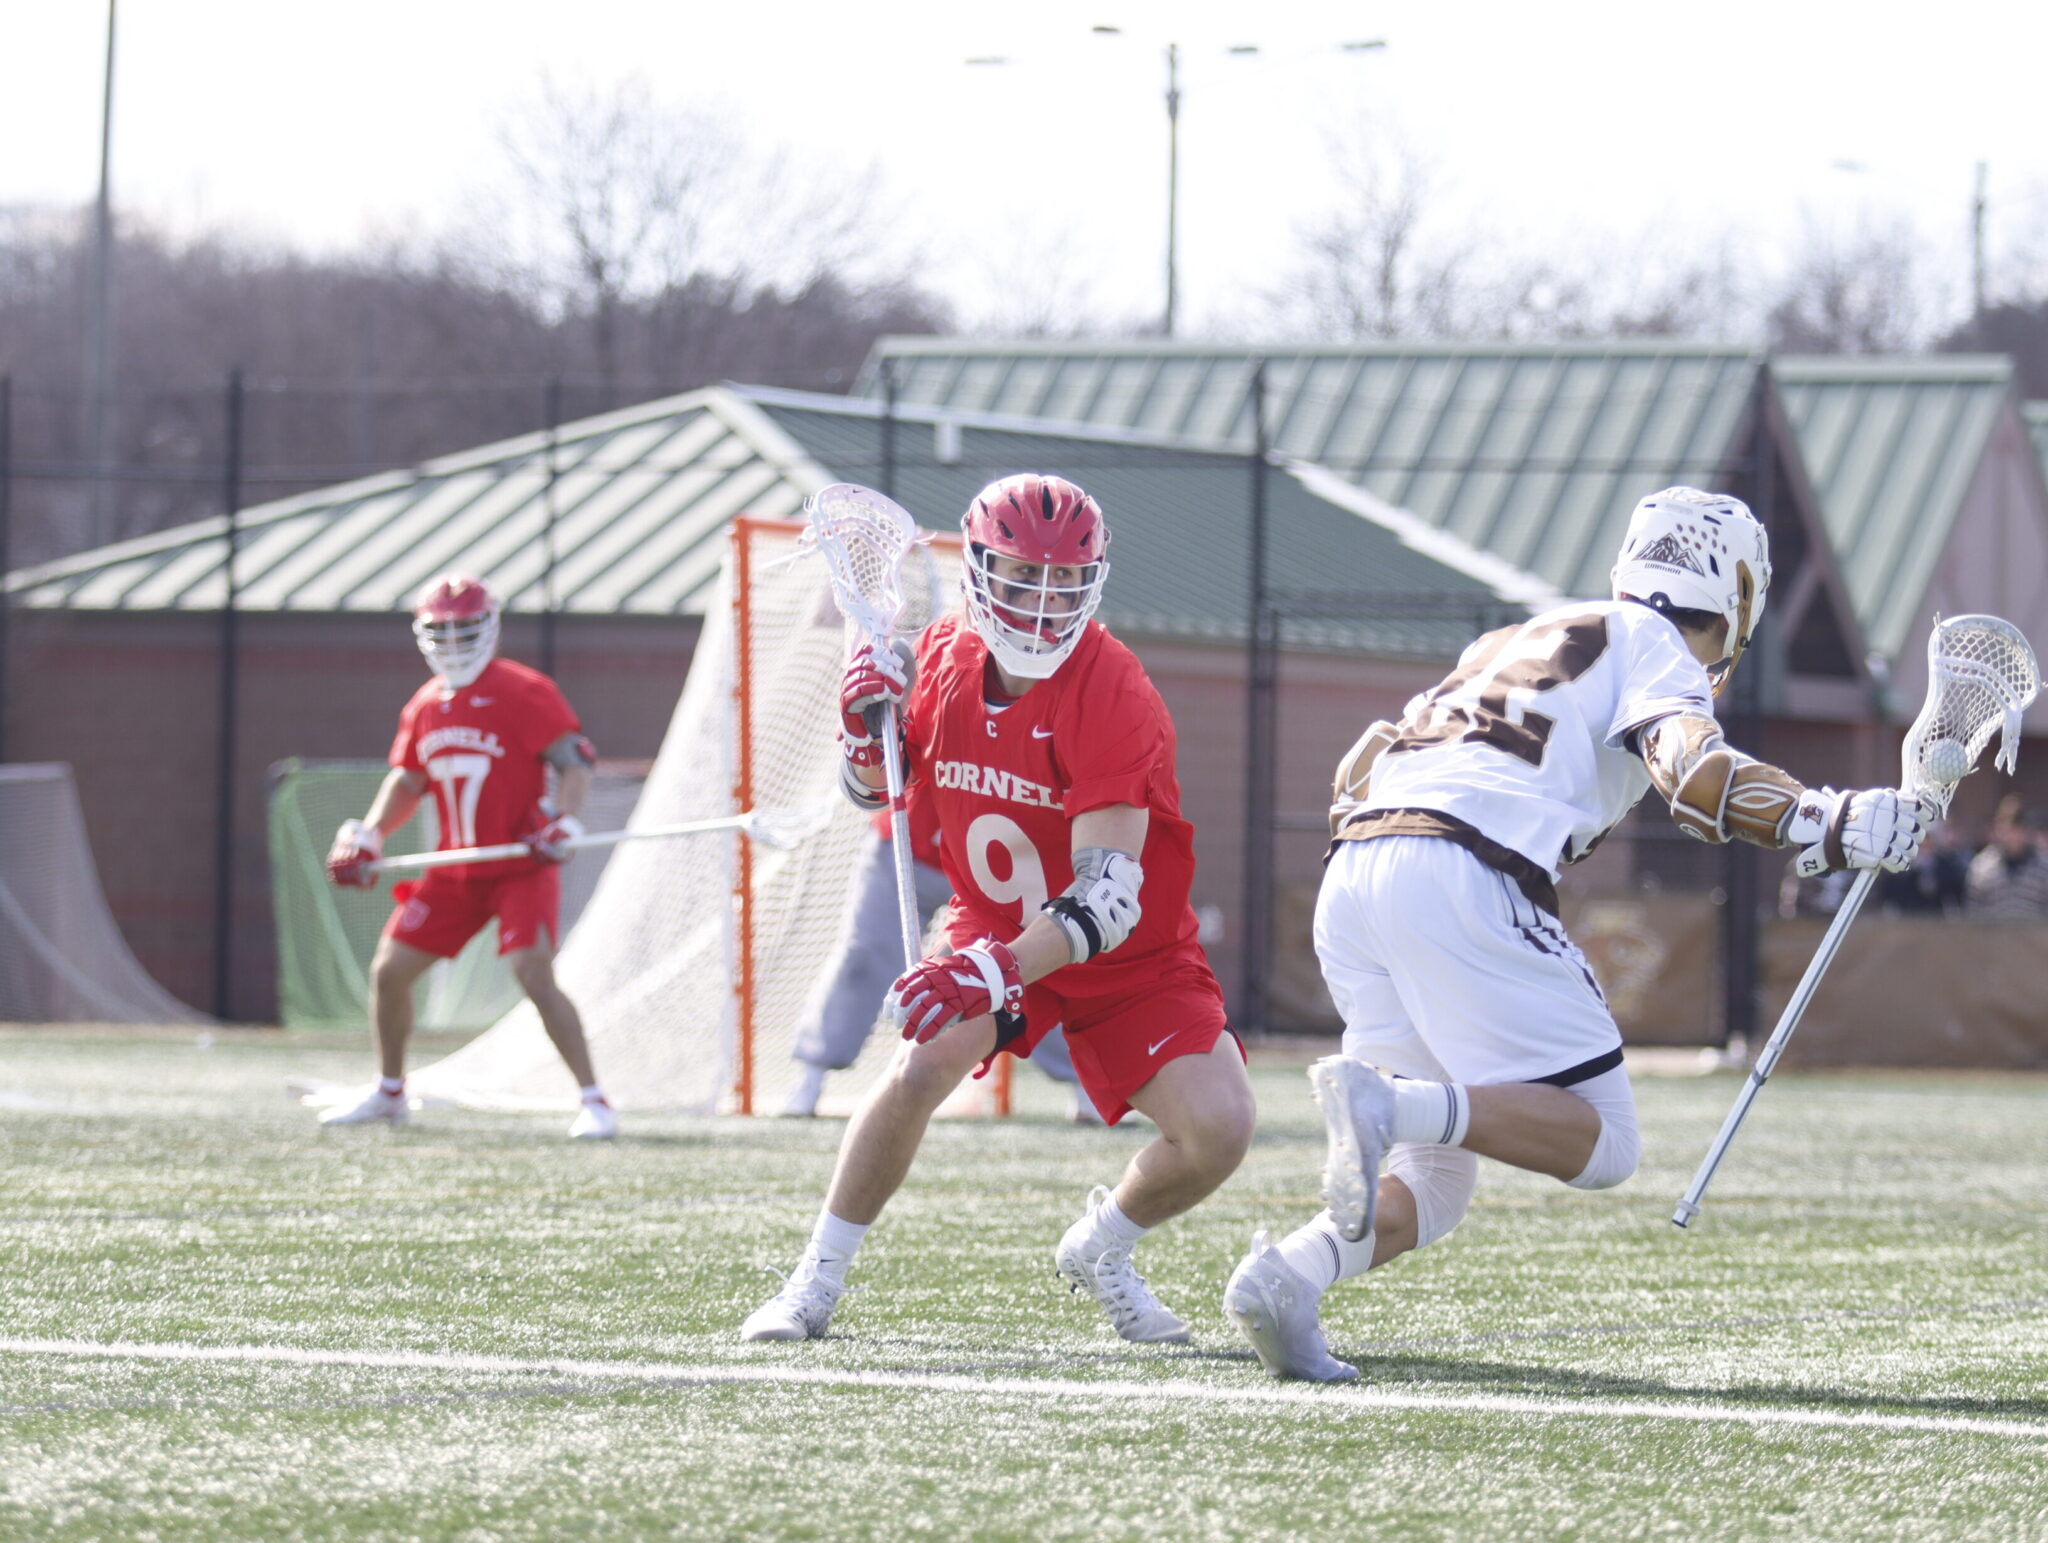 Lehigh men's lacrosse can't stop the Big Red wave - The Brown and White